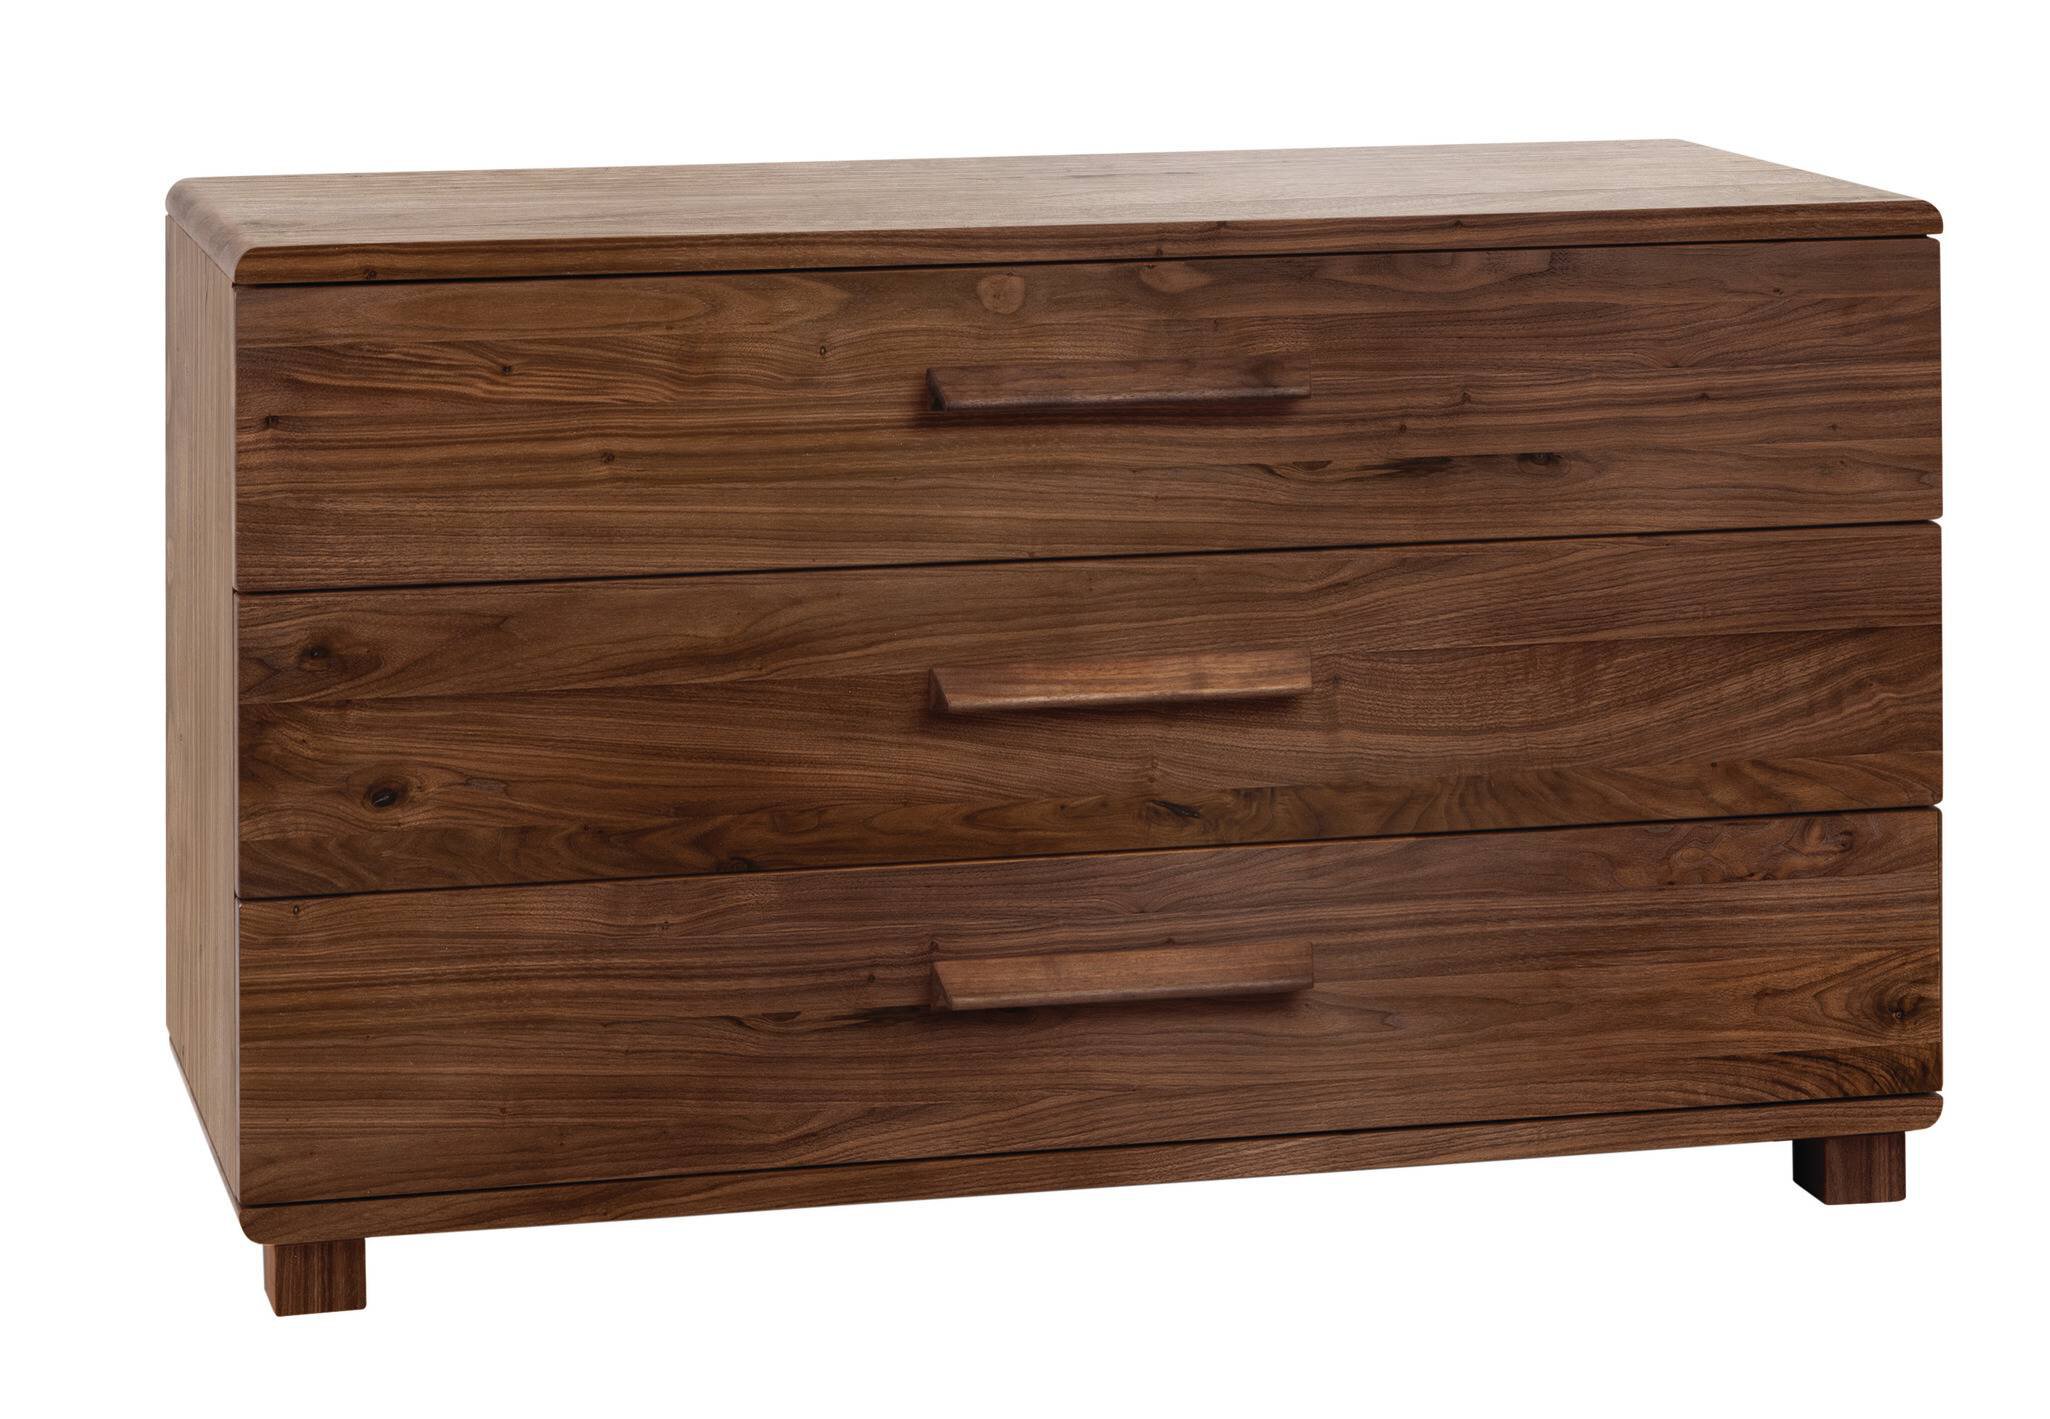 Sigma chest of drawers